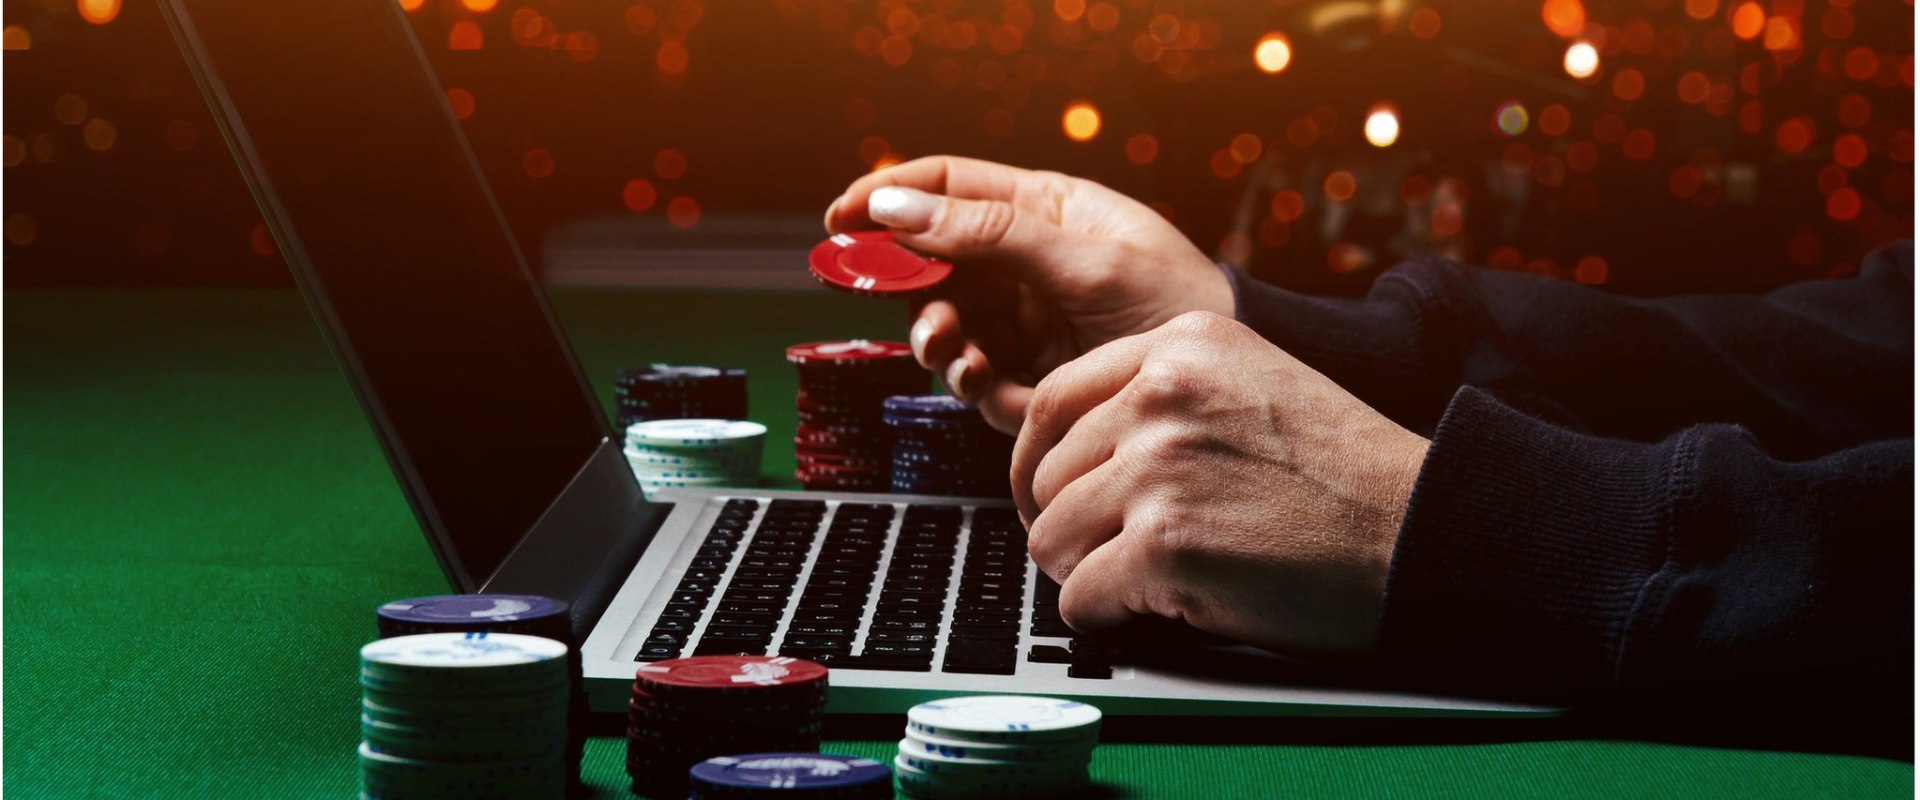 Can You Play Online Casinos in Australia?